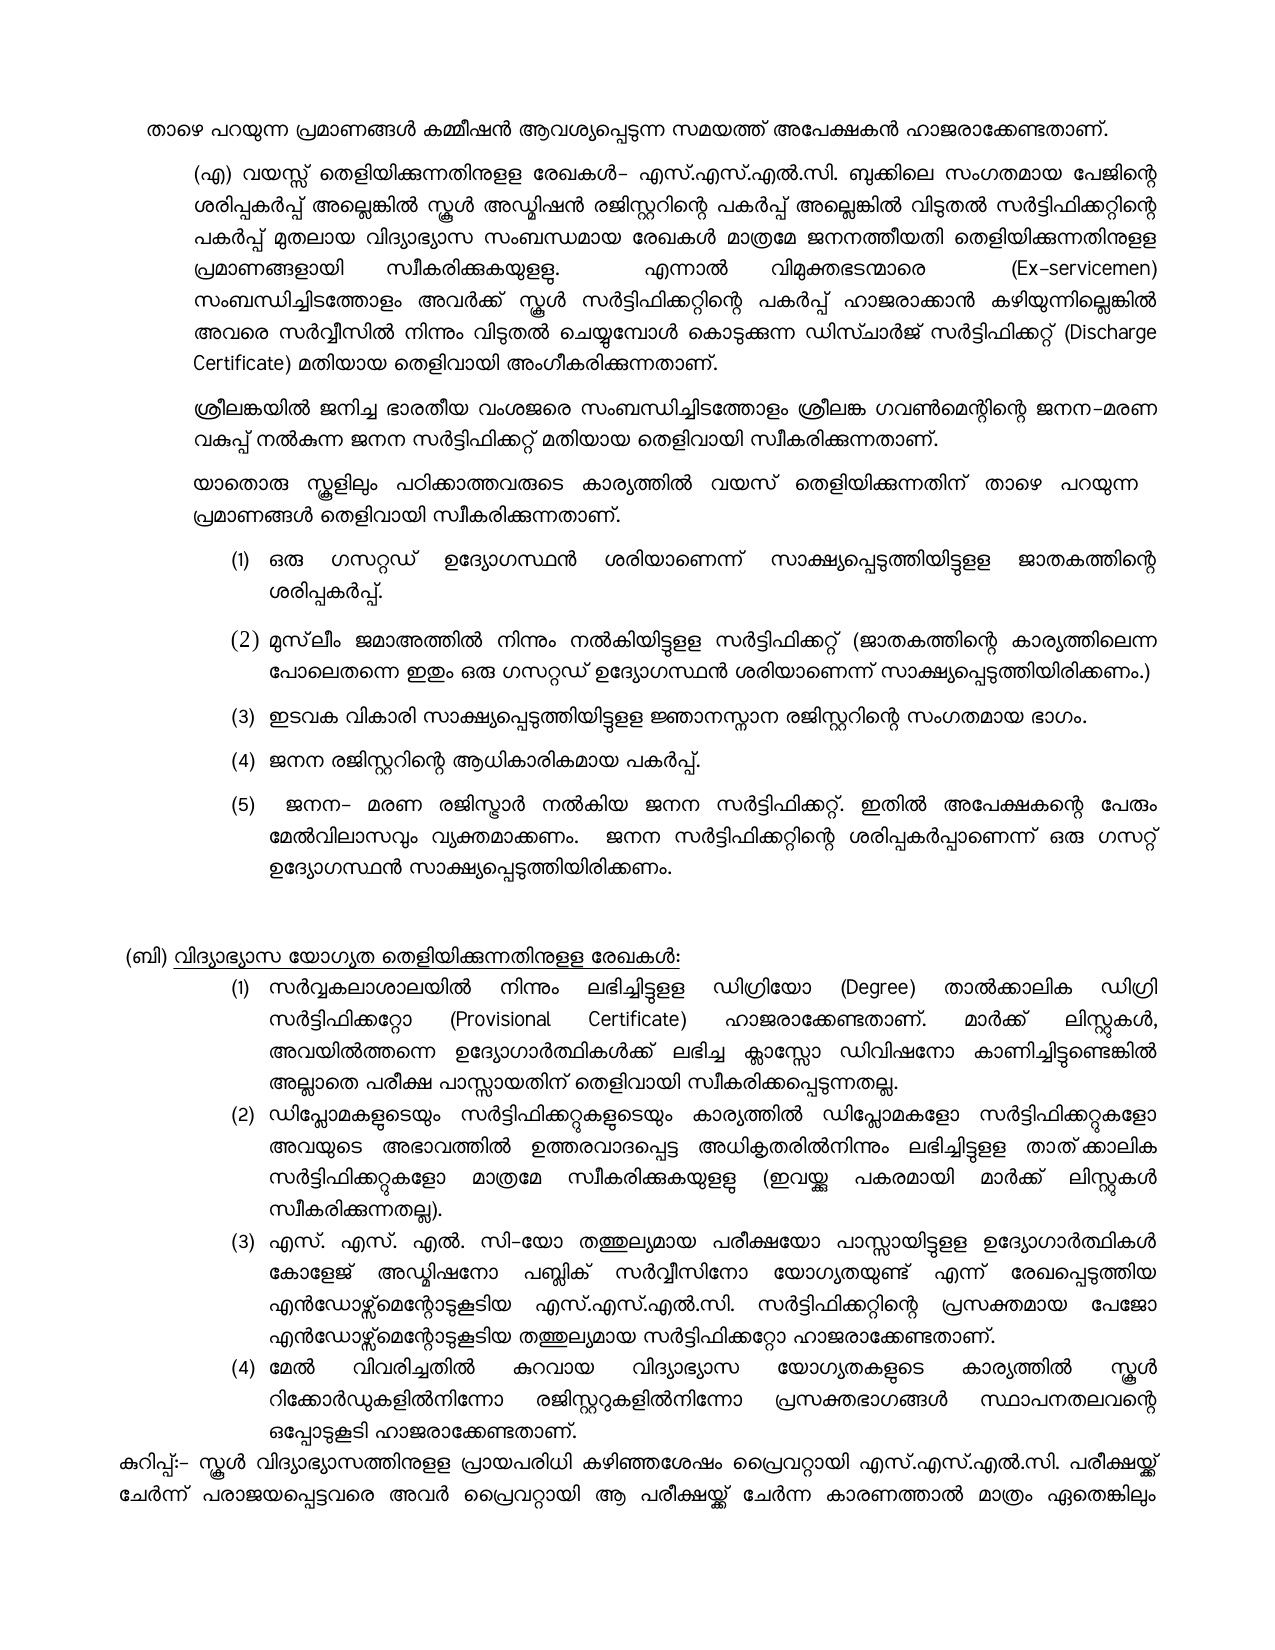 General Conditions and Certificate Formats in Malayalam - Notification Image 13